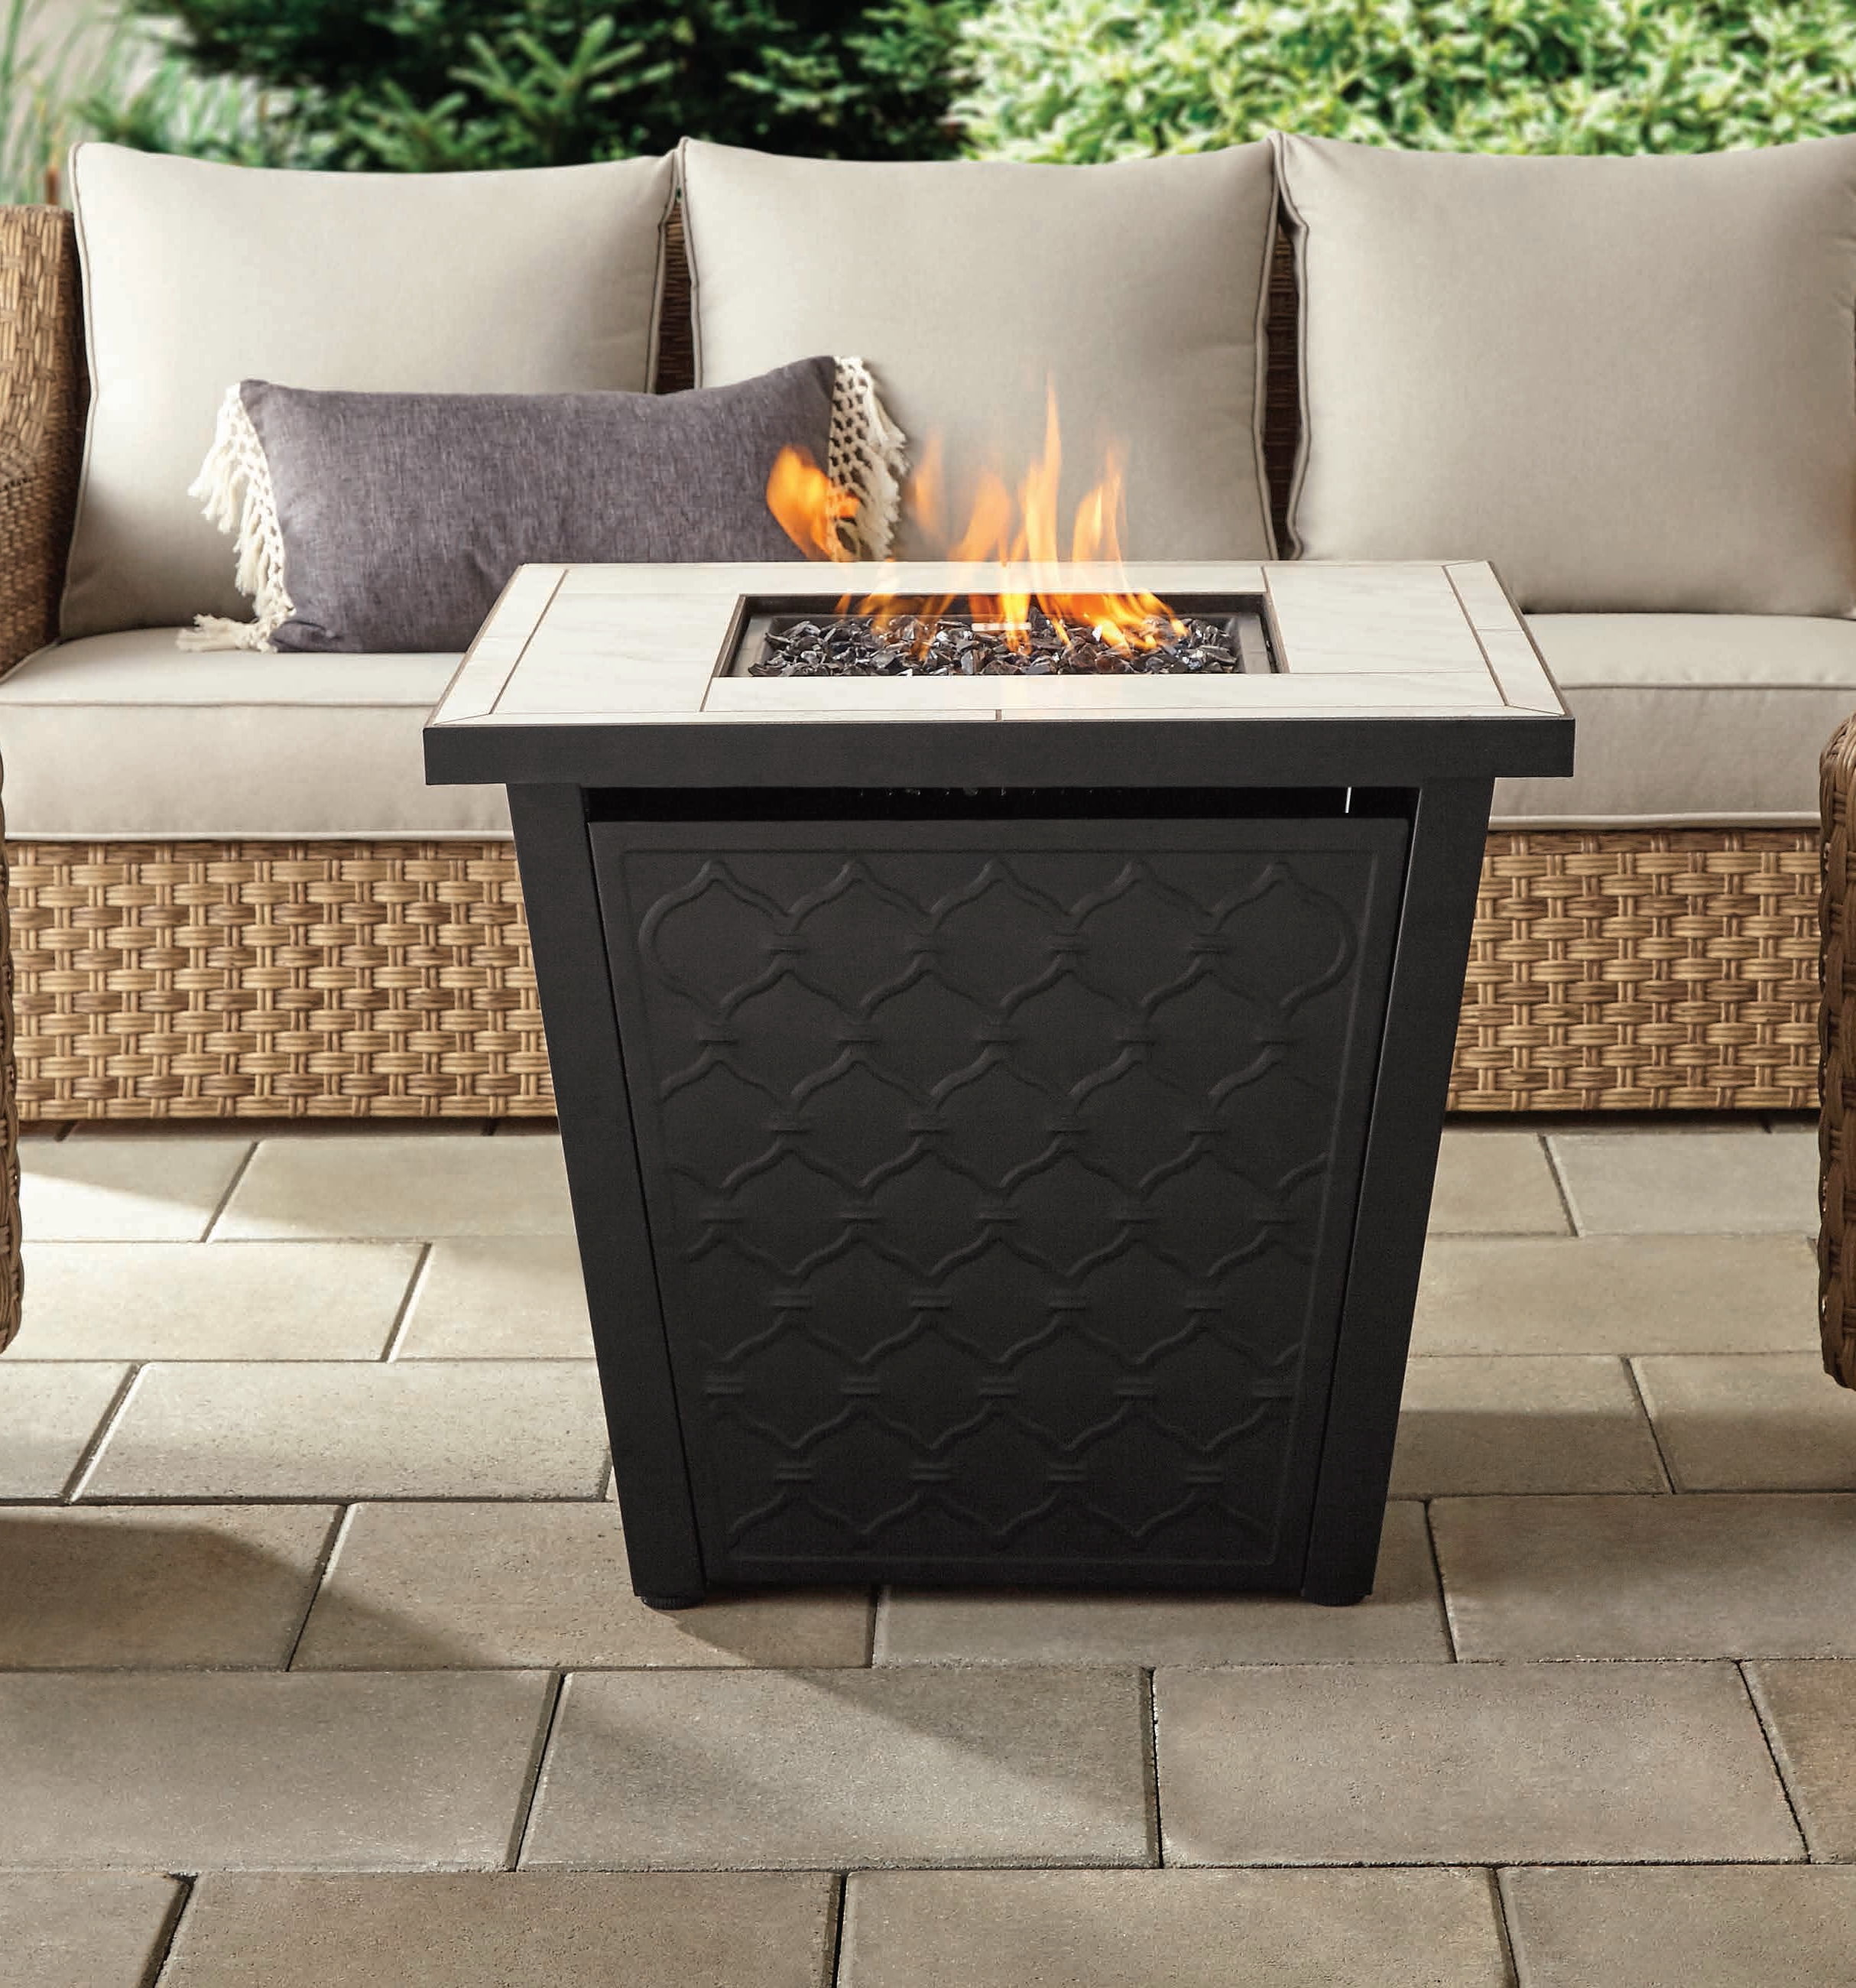 Square Lp Gas Ceramic Tile Fire Pit, How To Make A Homemade Propane Fire Pit